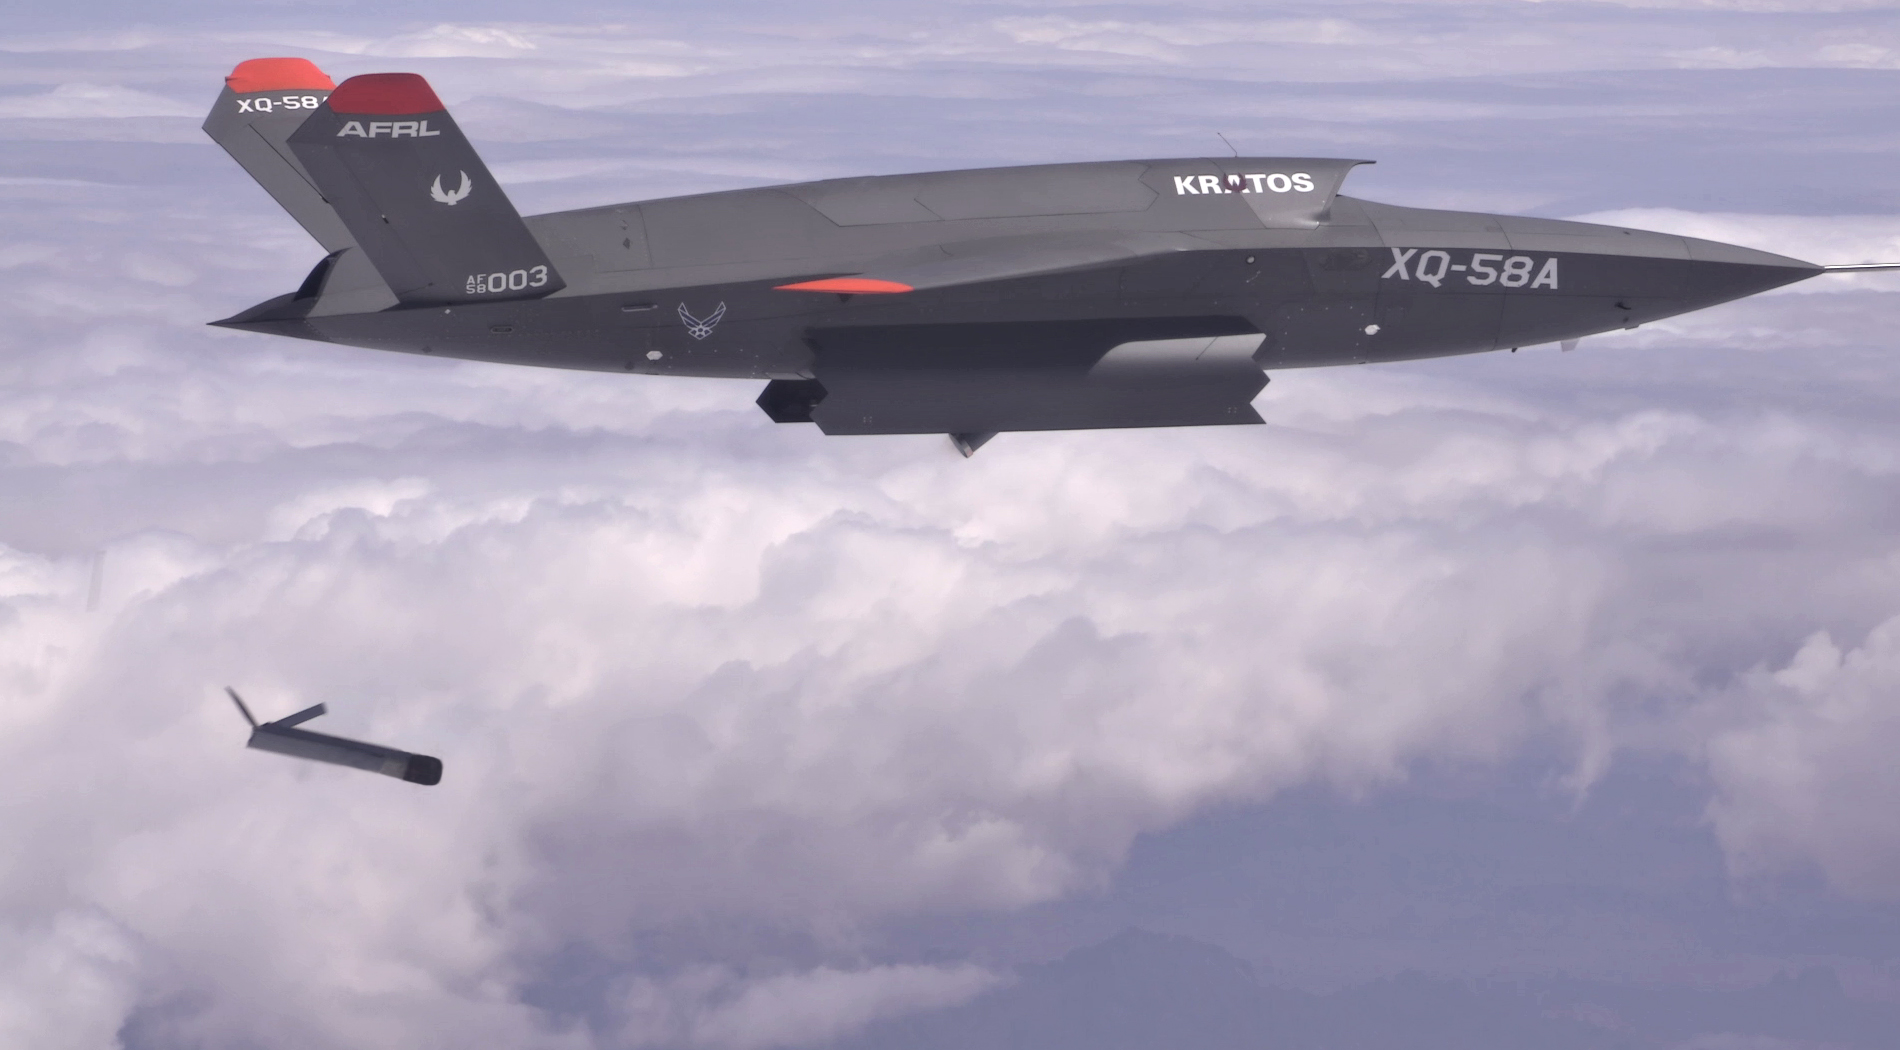 The U.S. Air Force has demonstrated the ability of its drones to launch other smaller drones. 

The Air Force Research Laboratory successfully completed the XQ-58A Valkyrie’s sixth flight test and first release from its internal weapons bay, March 26, 2021 at Yuma Proving Ground, Arizona. This test was the first time the weapons bay doors have been opened in flight. 

The Kratos XQ-58 Valkyrie is an experimental stealthy unmanned combat aerial vehicle. 

This test, conducted in partnership with Kratos UAS and Area-I, demonstrated the ability to launch an ALTIUS-600 small, unmanned aircraft system (SUAS) from the internal weapons bay of the XQ-58A. Kratos, Area-I and AFRL designed and fabricated the SUAS carriage and developed software to enable release. After successful release of the SUAS, the XQ-58A completed additional test points to expand its demonstrated operating envelope. 

“This is the sixth flight of the Valkyrie and the first time the payload bay doors have been opened in flight,” said Alyson Turri, demonstration program manager. “In addition to this first SUAS separation demonstration, the XQ-58A flew higher and faster than previous flights.” 

This test further demonstrates the utility of affordable, high performance unmanned air vehicles.

Where: Wright-Patterson Air Force Base, Ohio, United States
When: 26 Mar 2021
Credit: USAF/Cover-Images.com

**Editorial Use Only**